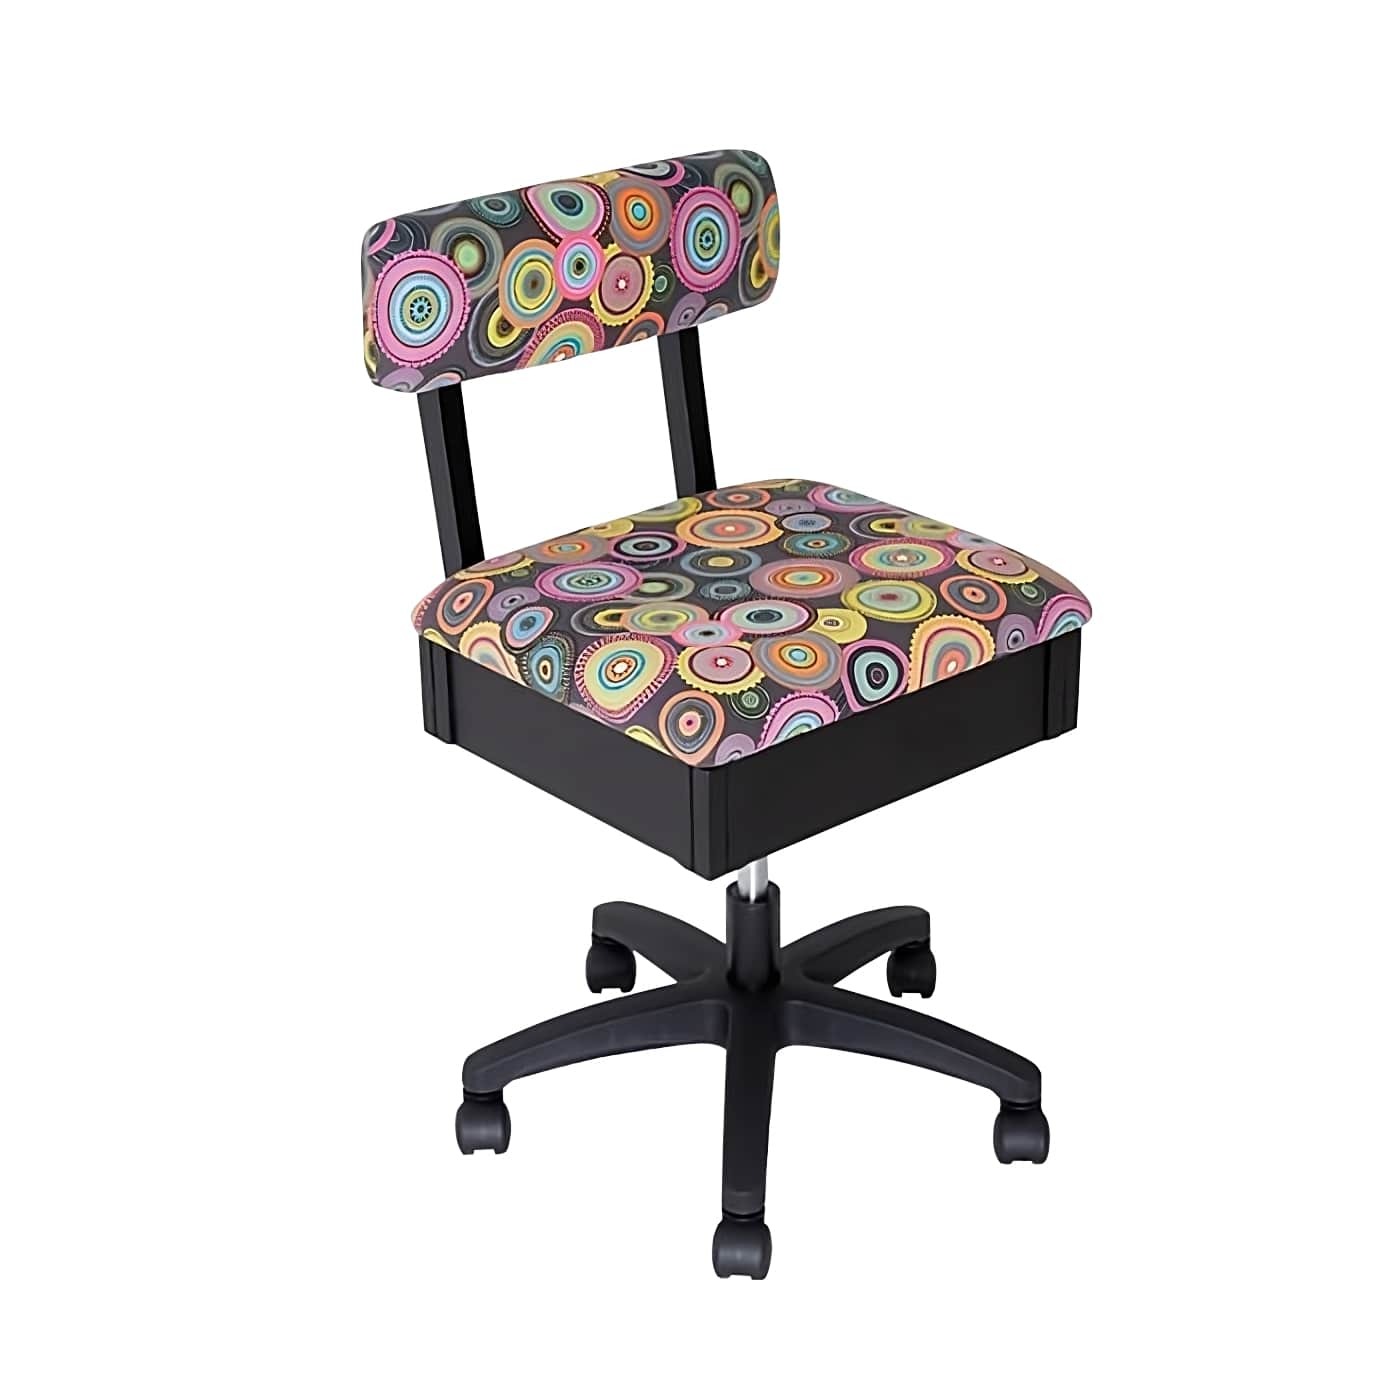 Adjustable Height Sewing Chair with Storage Compartment